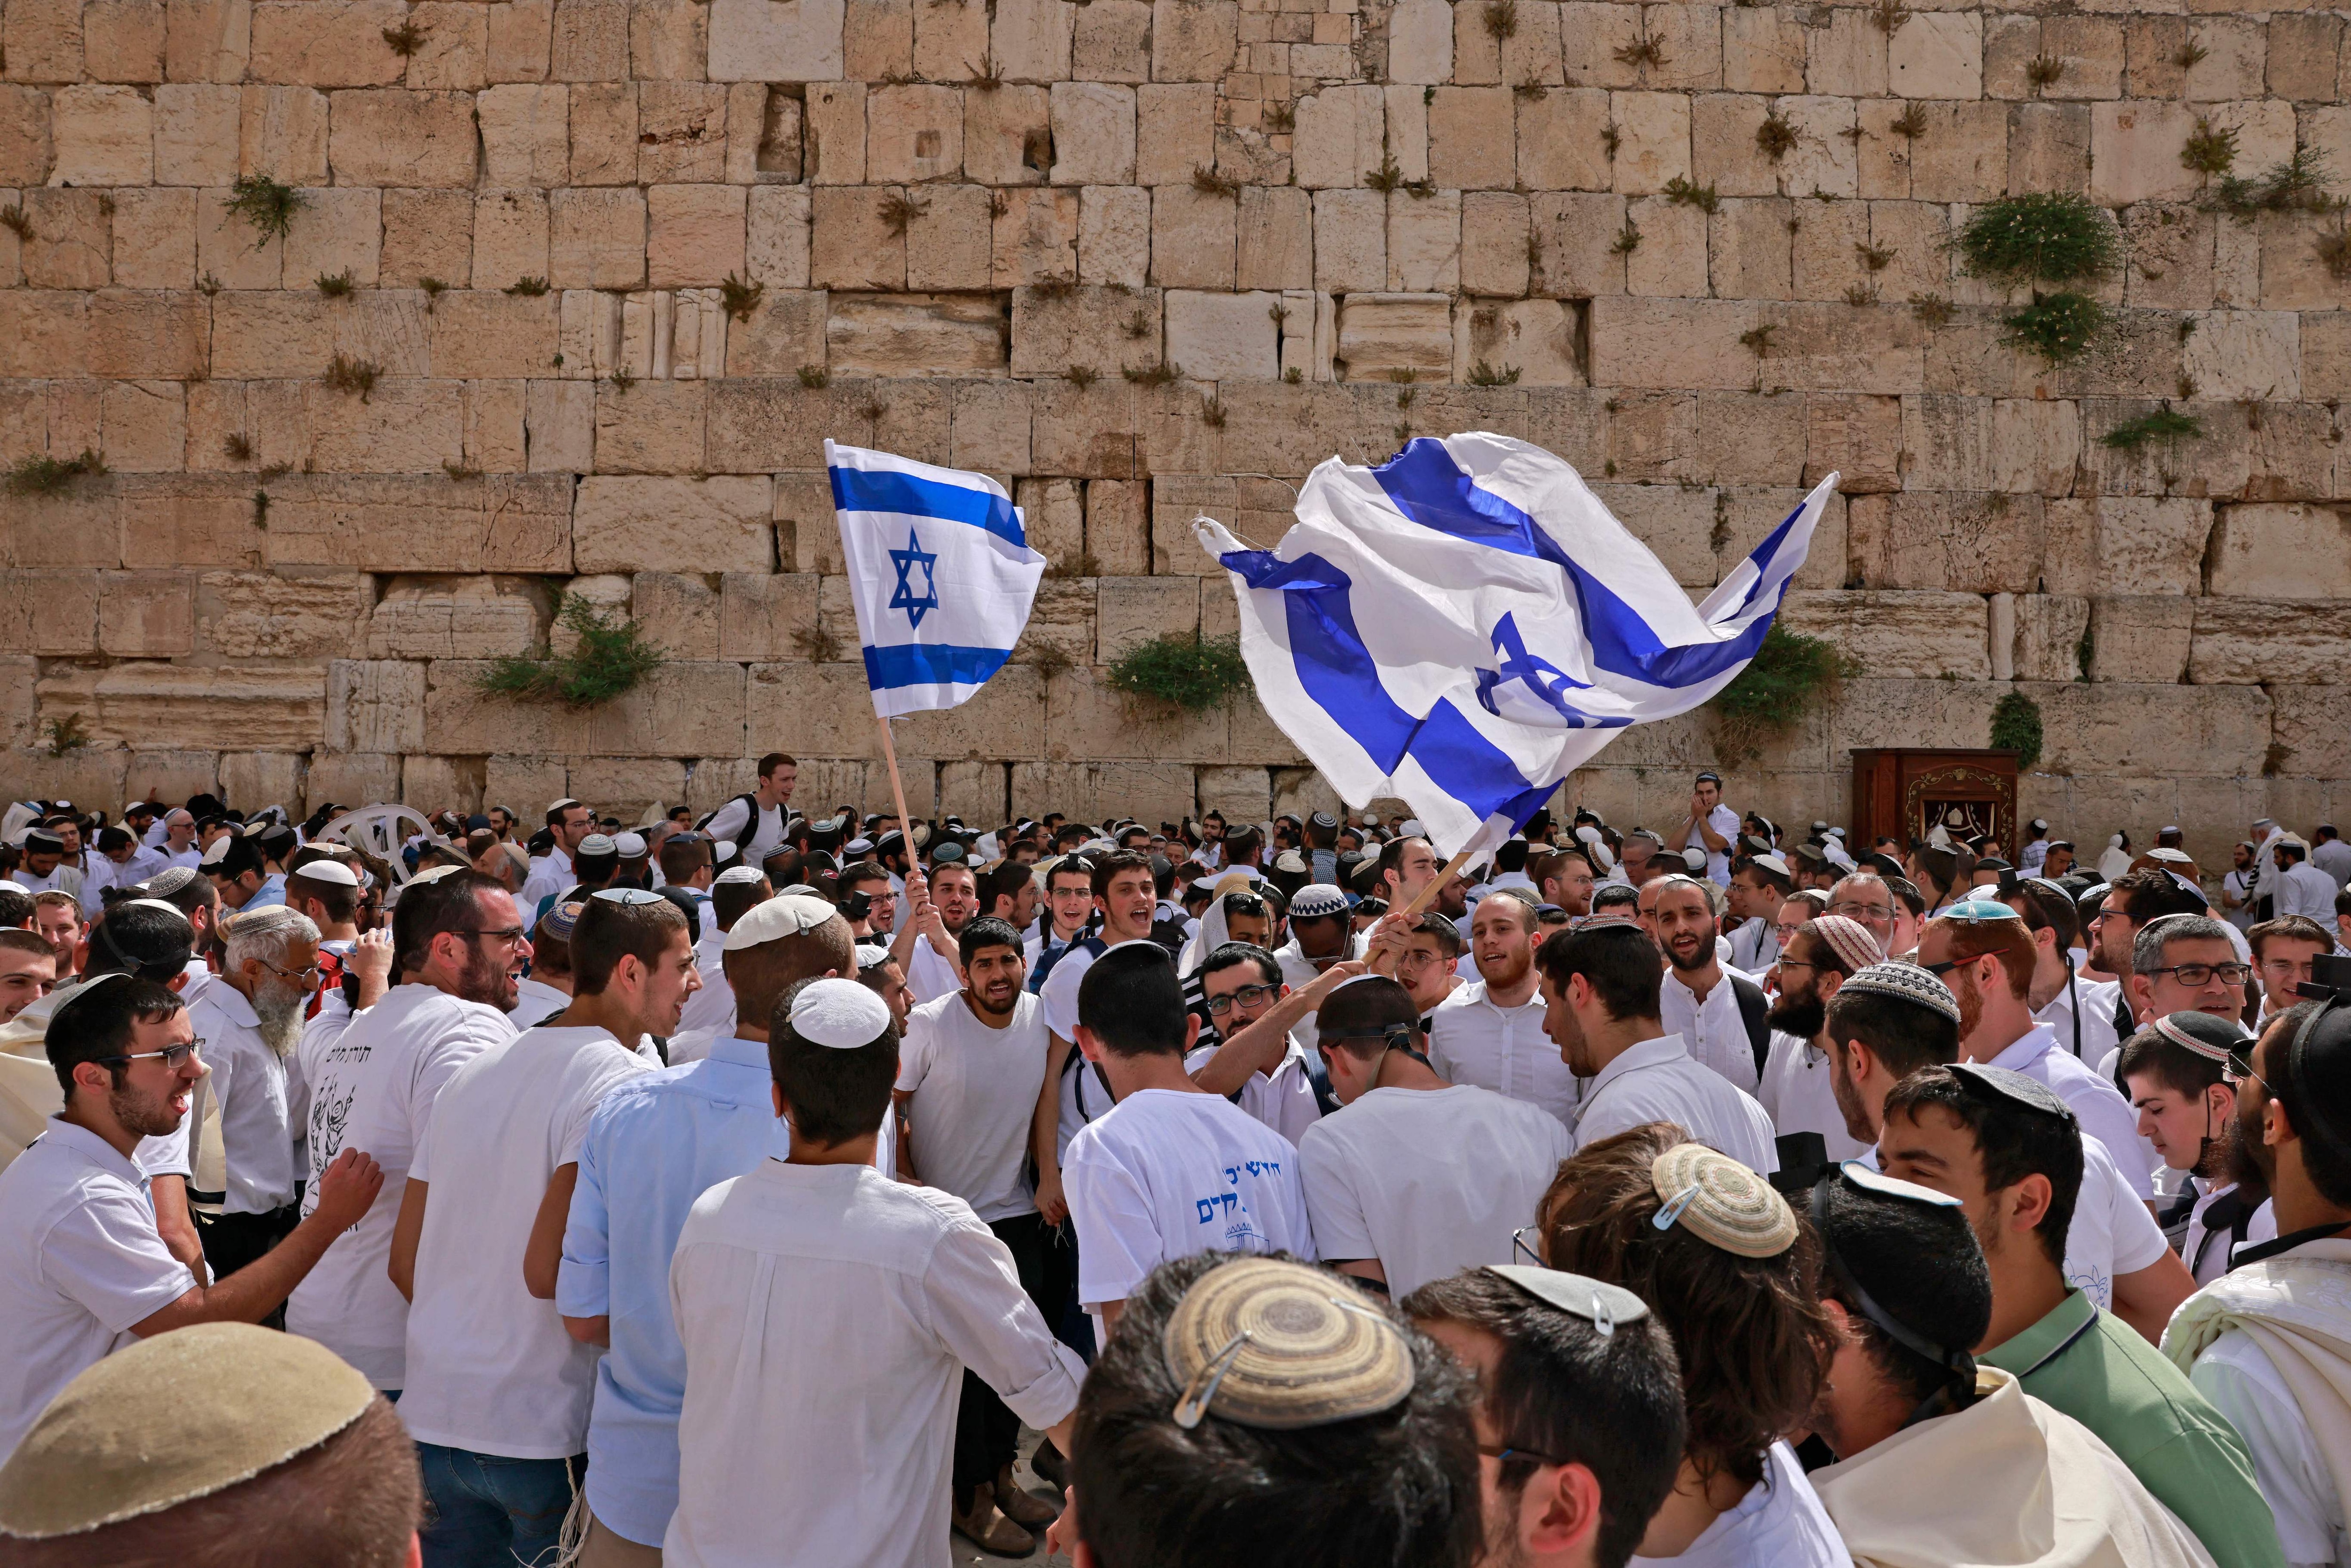 Jewish men wave Israeli flags as they gather at the Western Wall in the old city of Jerusalem on 10 May as Israel marks "Jerusalem Day".